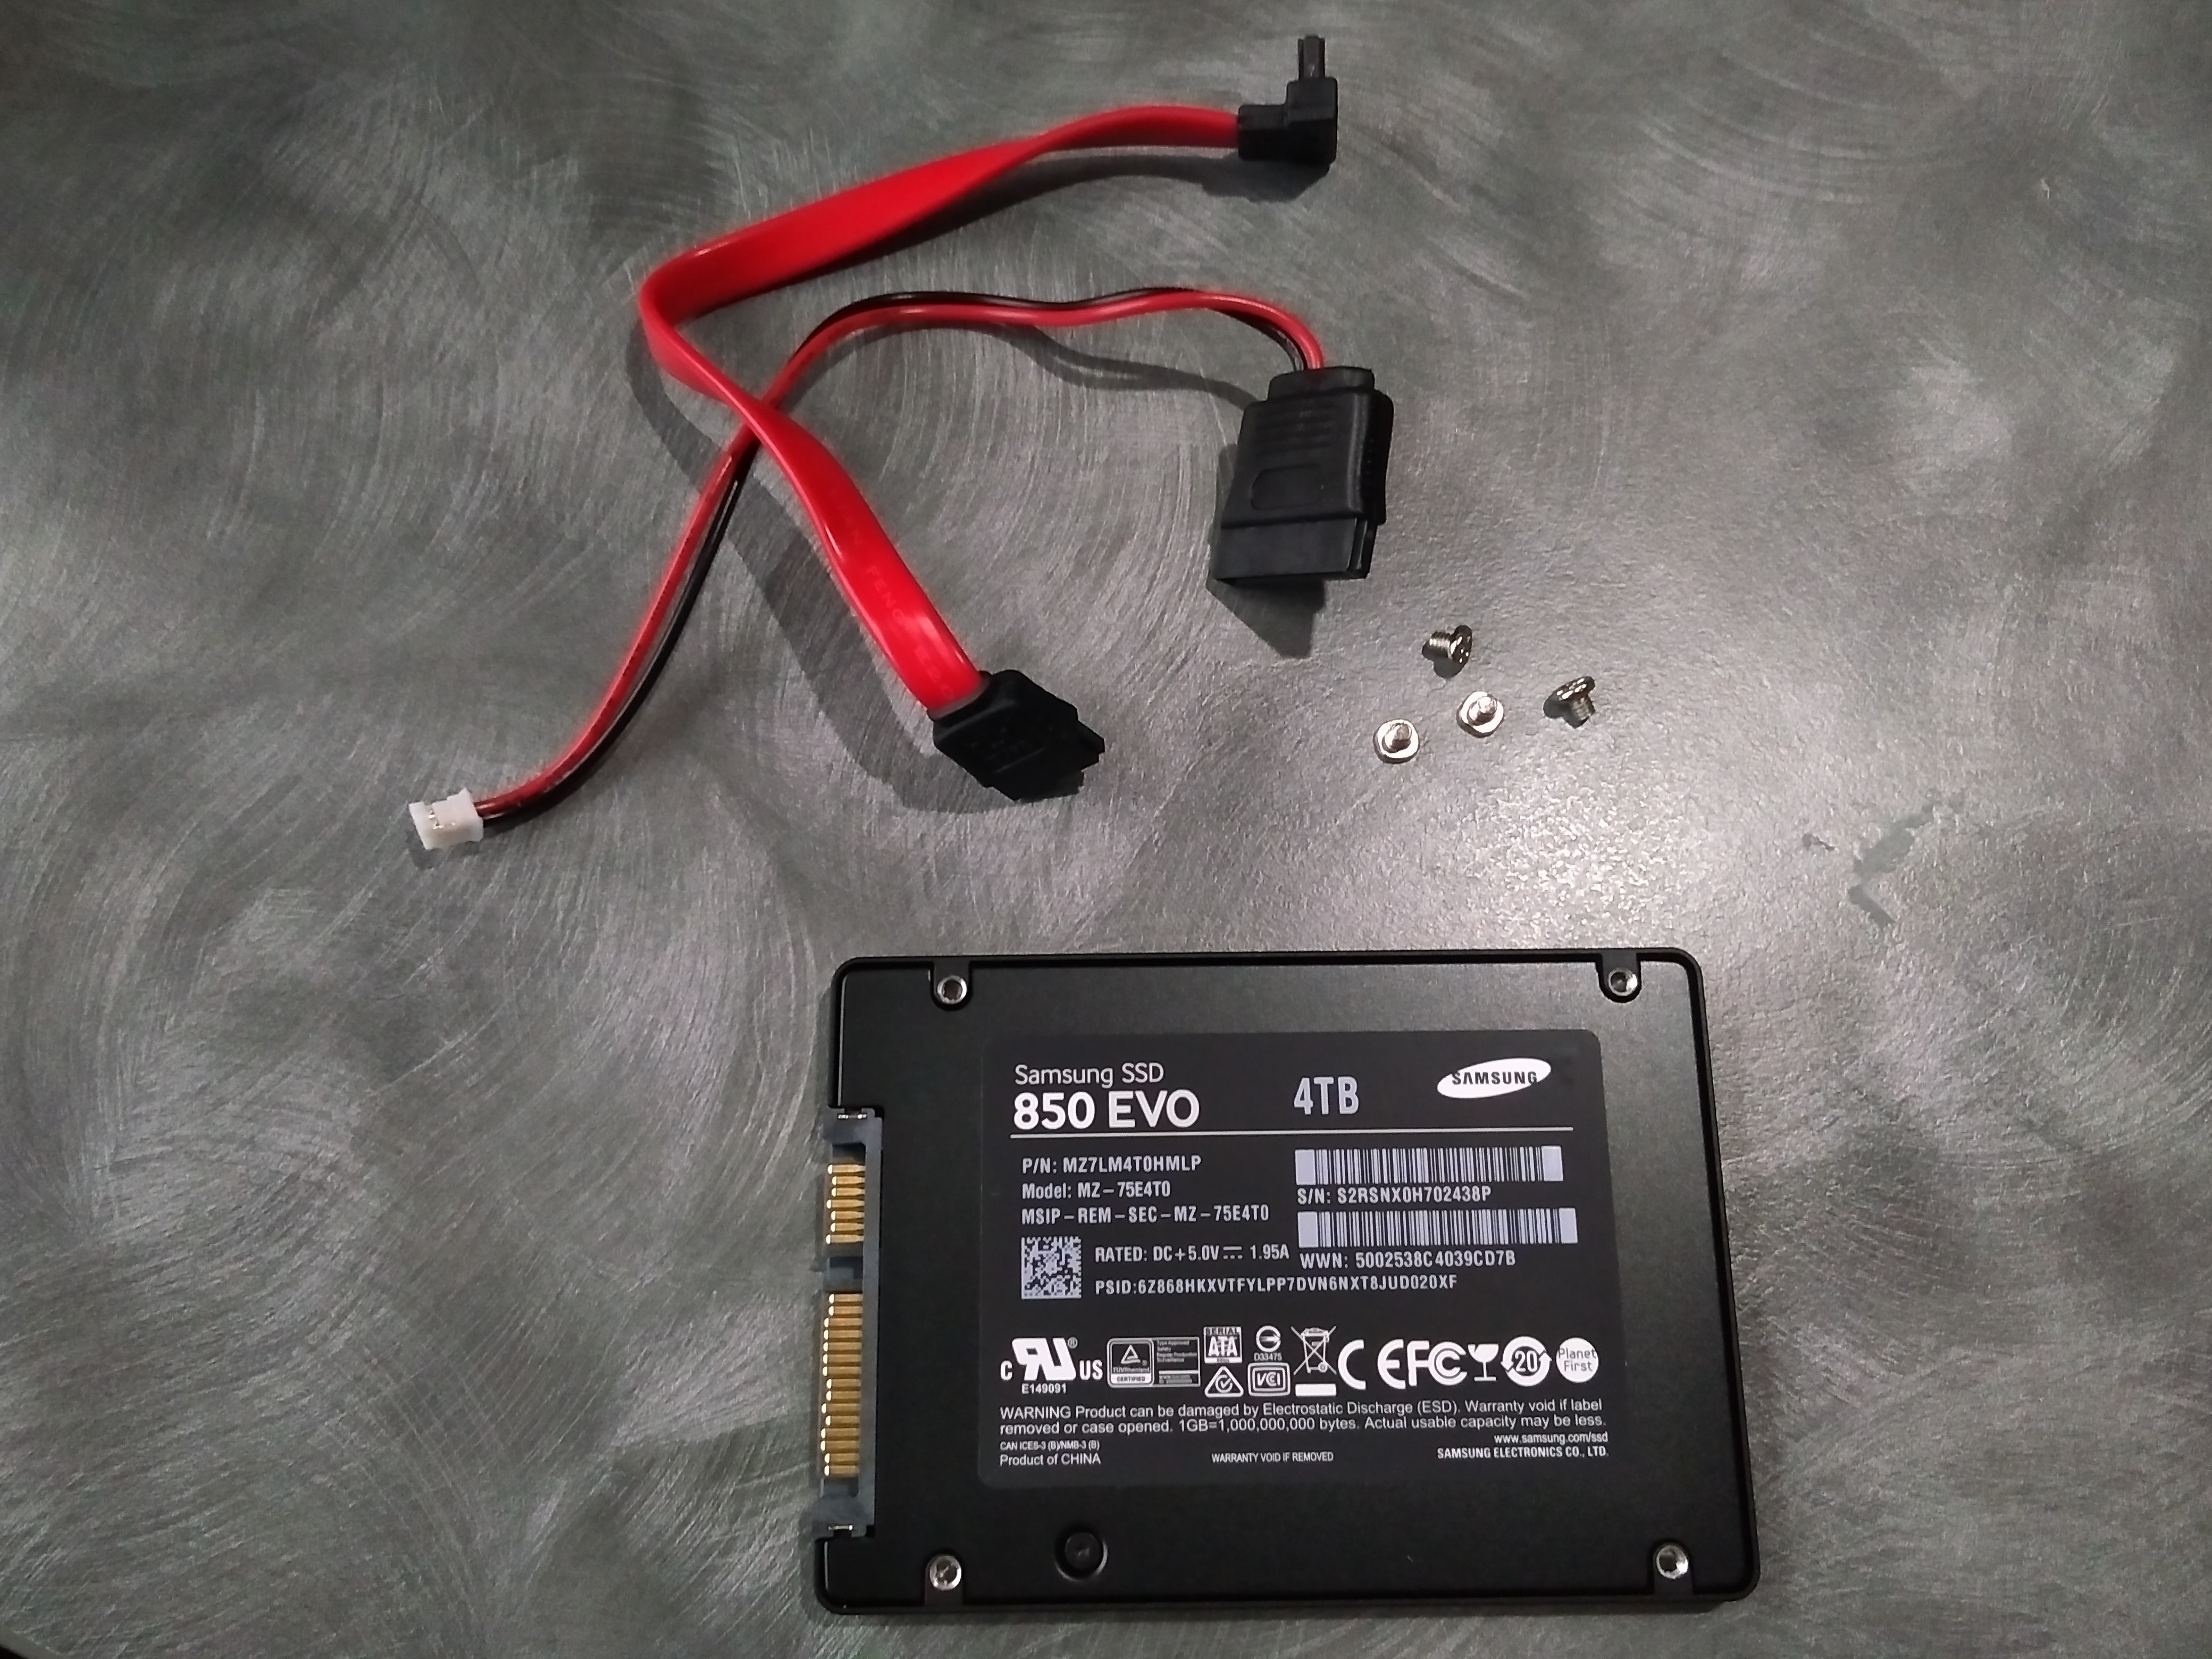 fremtid Understrege forgænger SOLD: 4TB SSD Australia - Samsung 850 EVO SSD 2.5" SATA III 4TB with FREE  USB 3.0 portable enclosure - Sales and Trades - Roon Labs Community